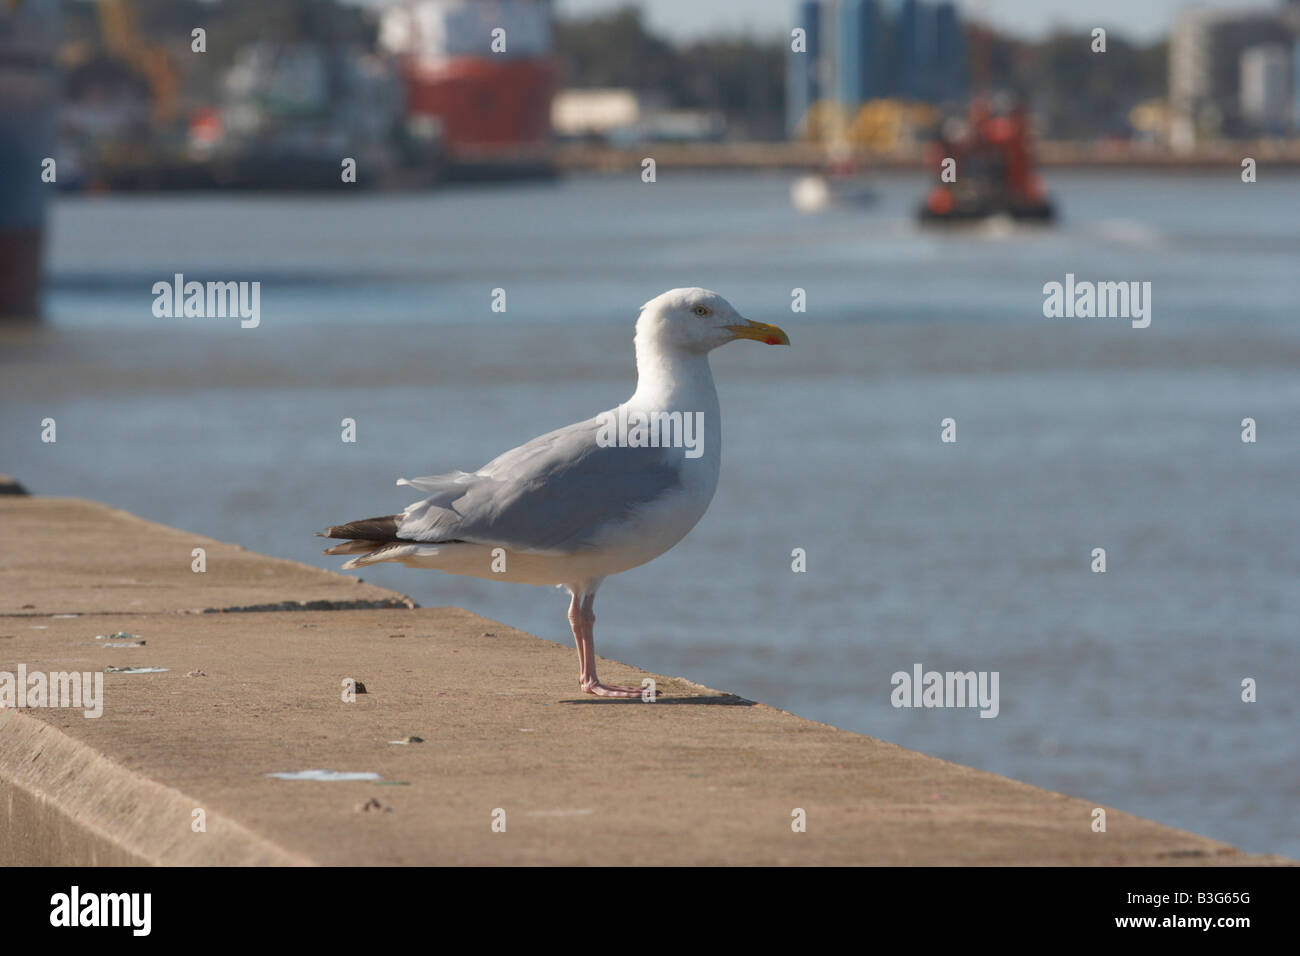 Sea Gull standing on wall Banque D'Images